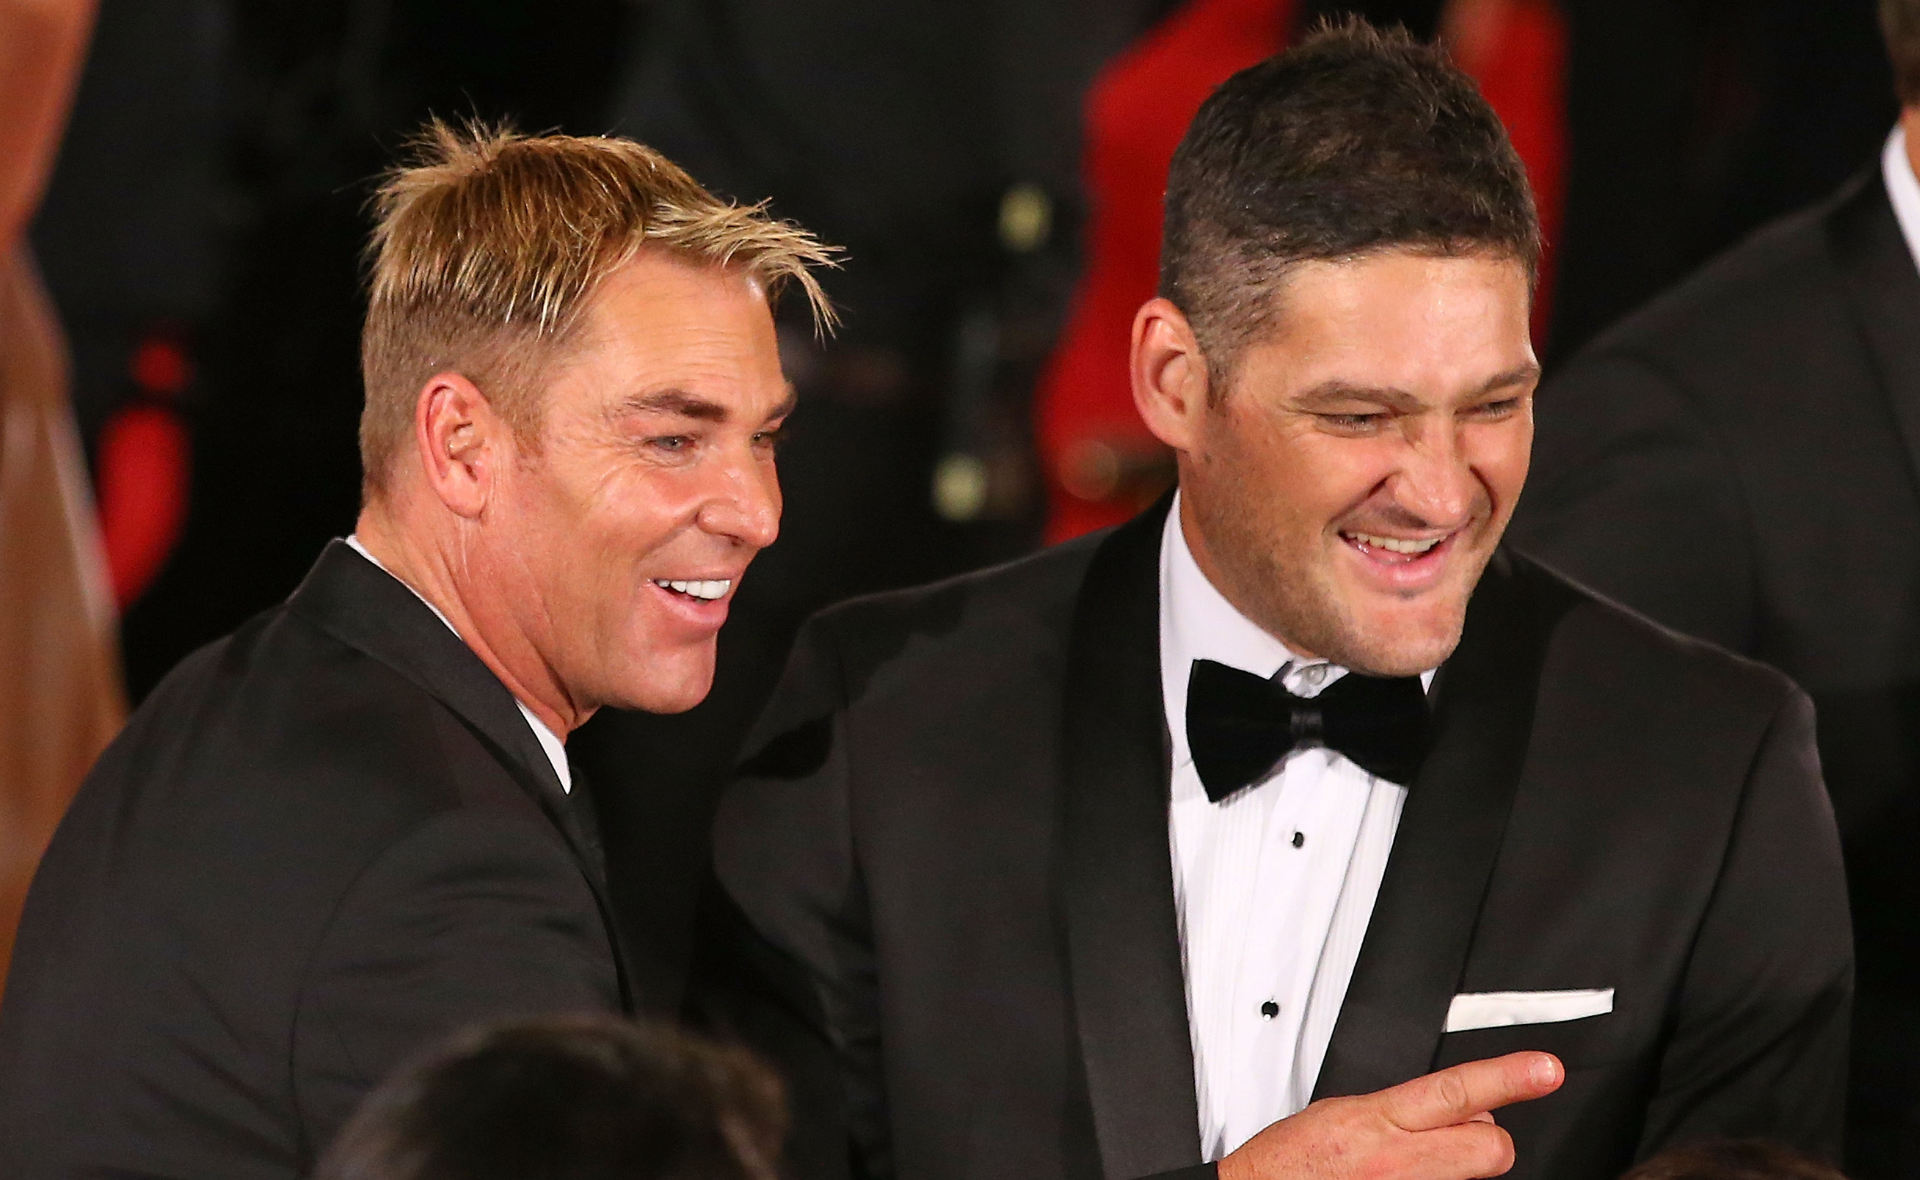 “You would have been bloody proud of your kids tonight”: Brendan Fevola’s sweet message to Shane Warne following state memorial service